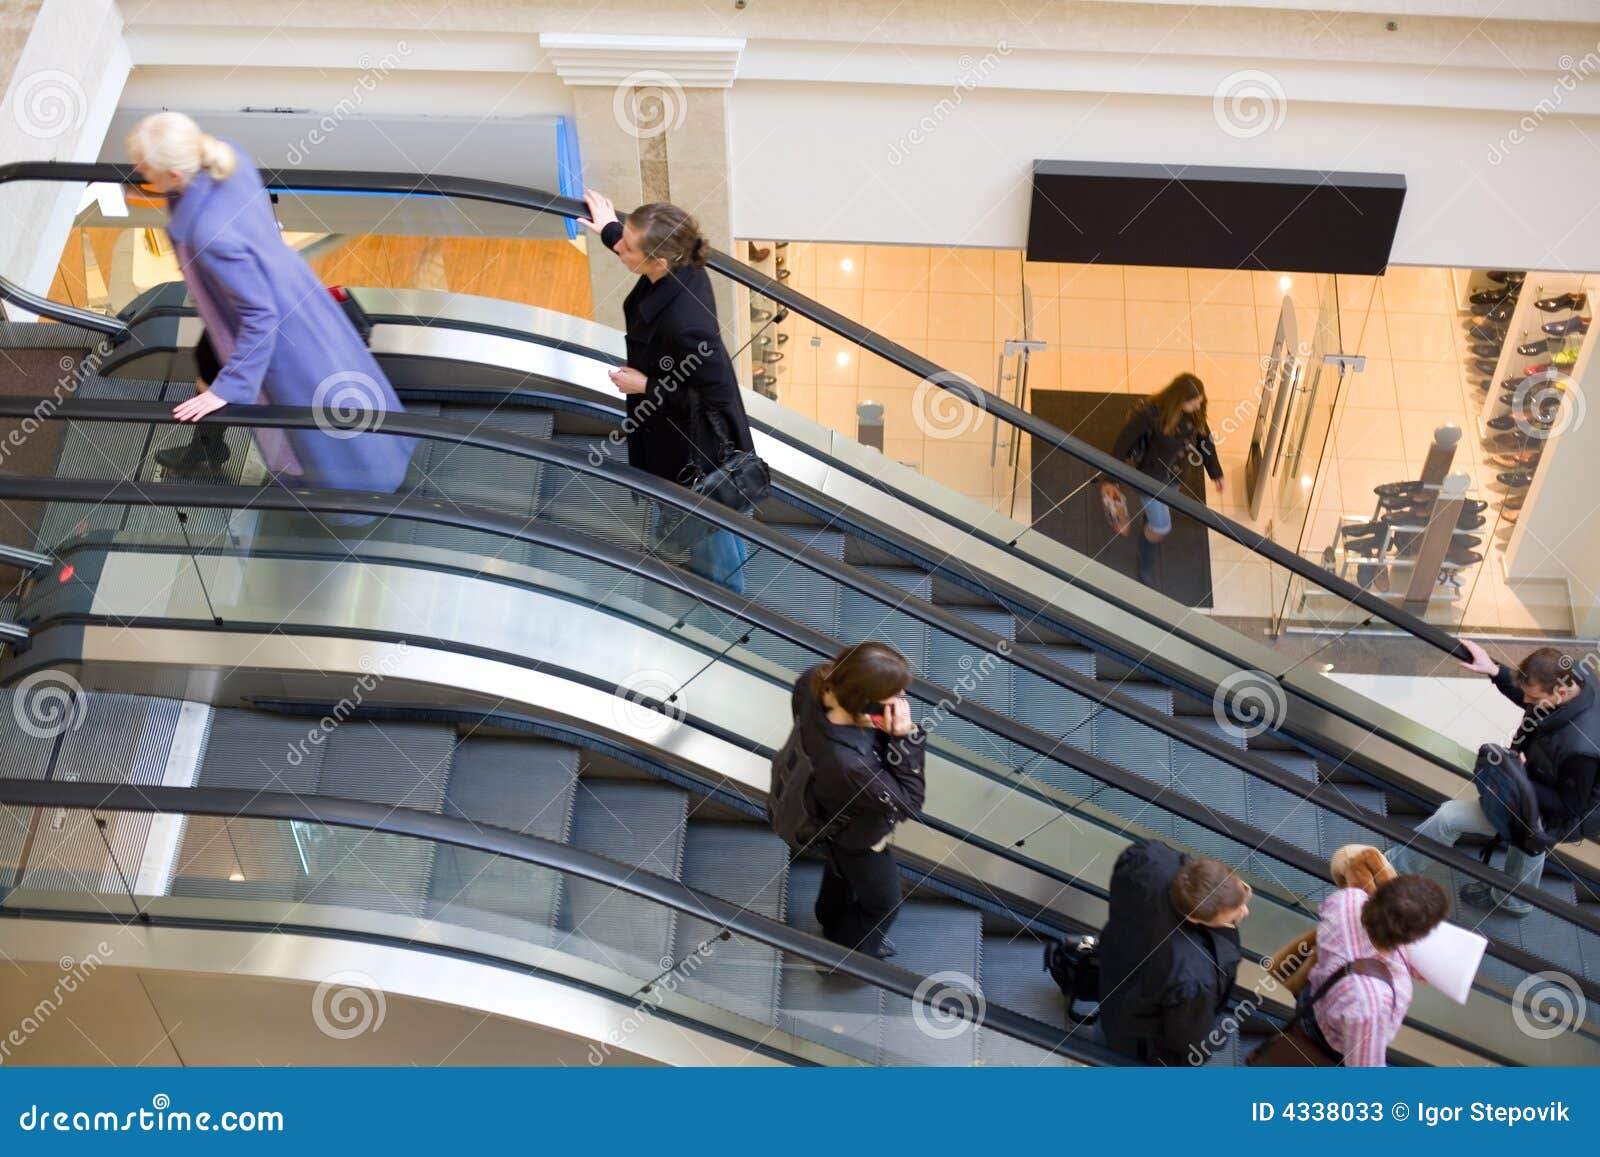 peoples on escalators in a mall